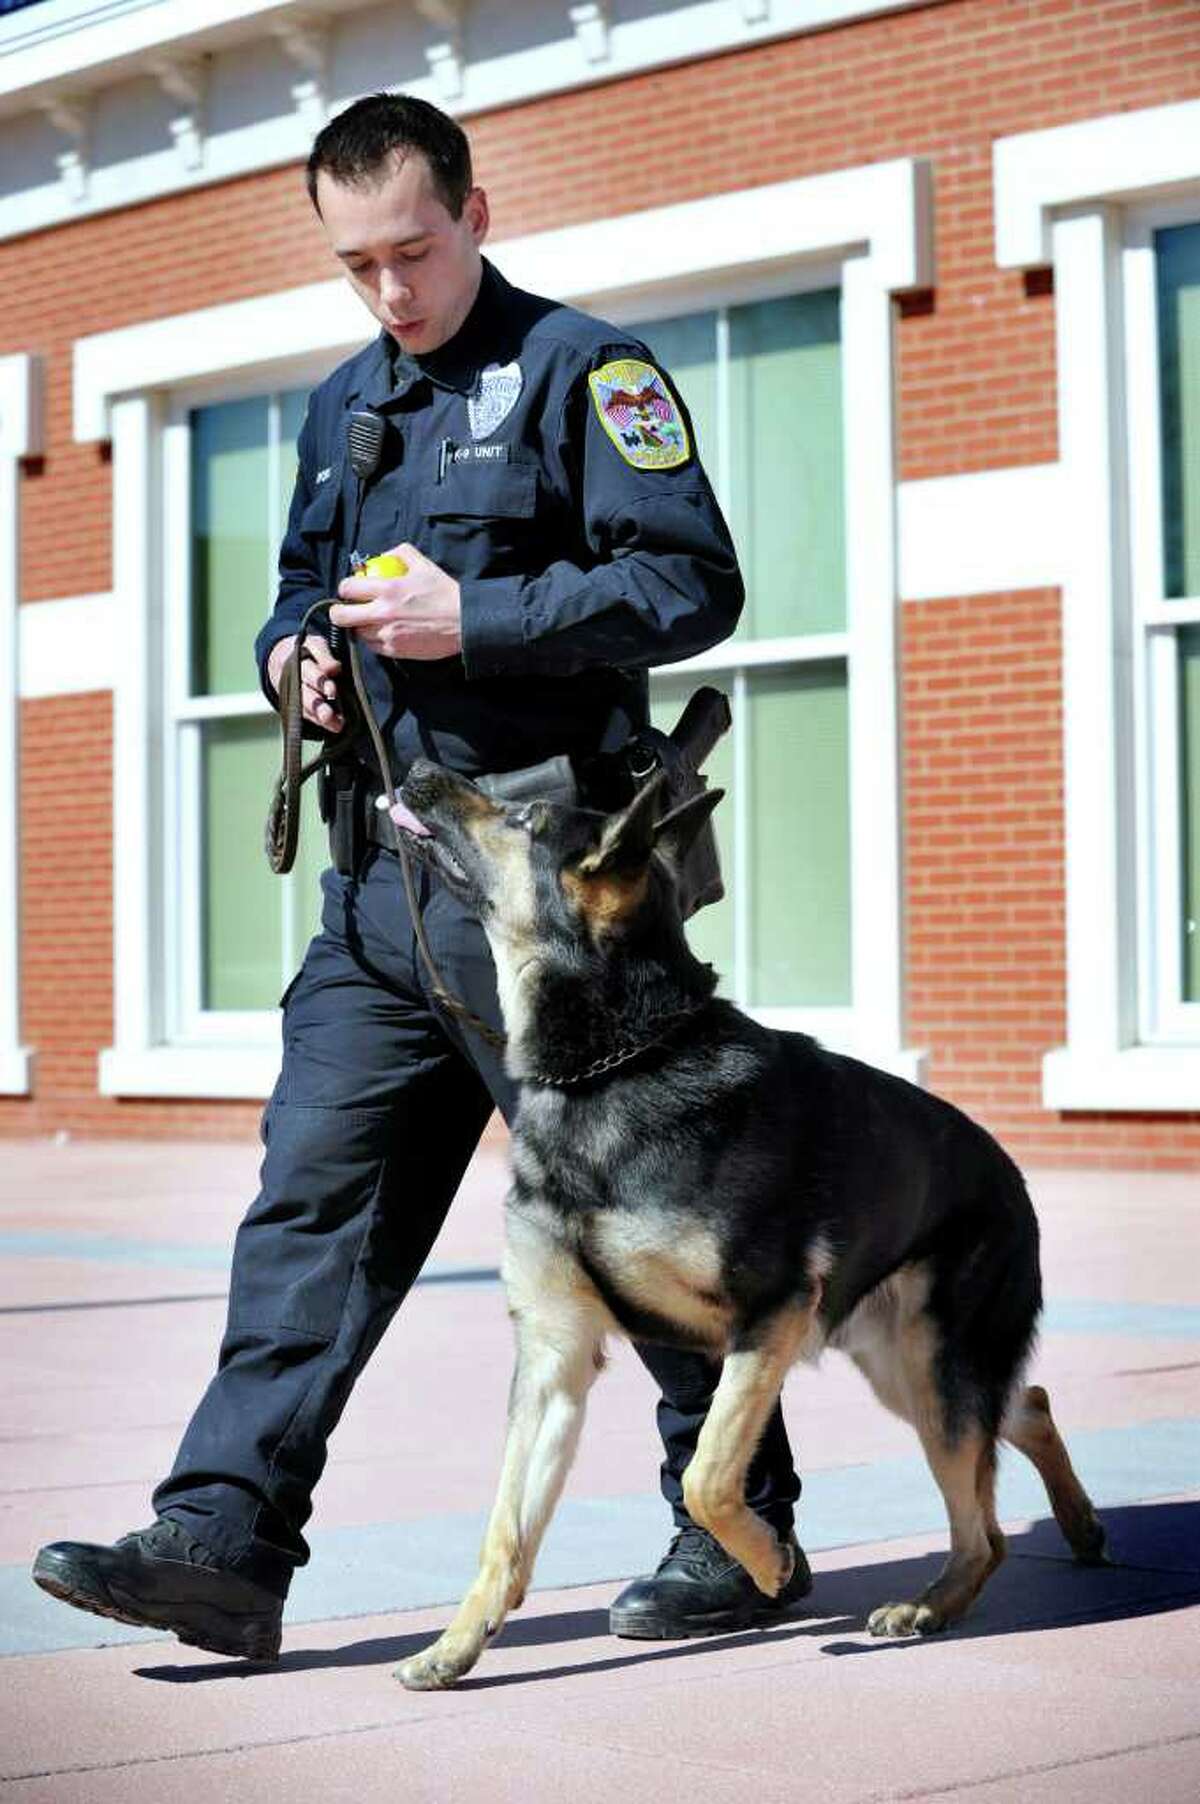 Danbury Police Officer Travis Kupchok takes Koda, a department police dog, and his canine partner, through some obedience routines at police headquarters, Tuesday, March 6, 2012.